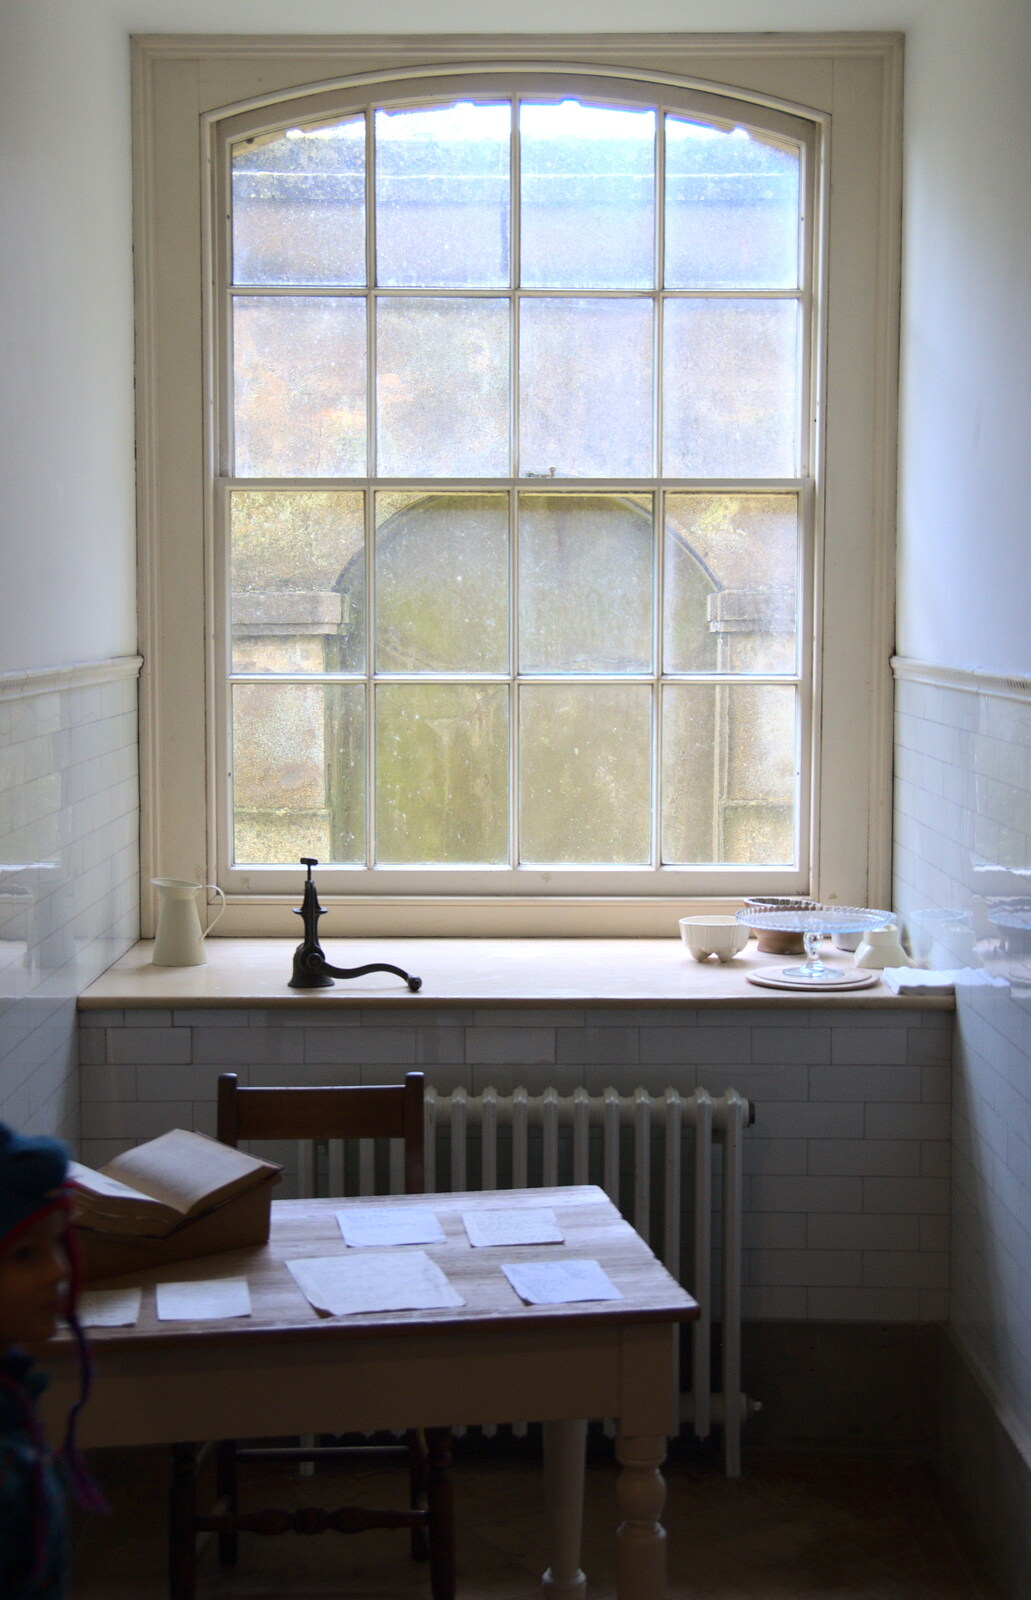 A kitchen window from Life Below Stairs, Ickworth House, Horringer, Suffolk - 28th January 2018